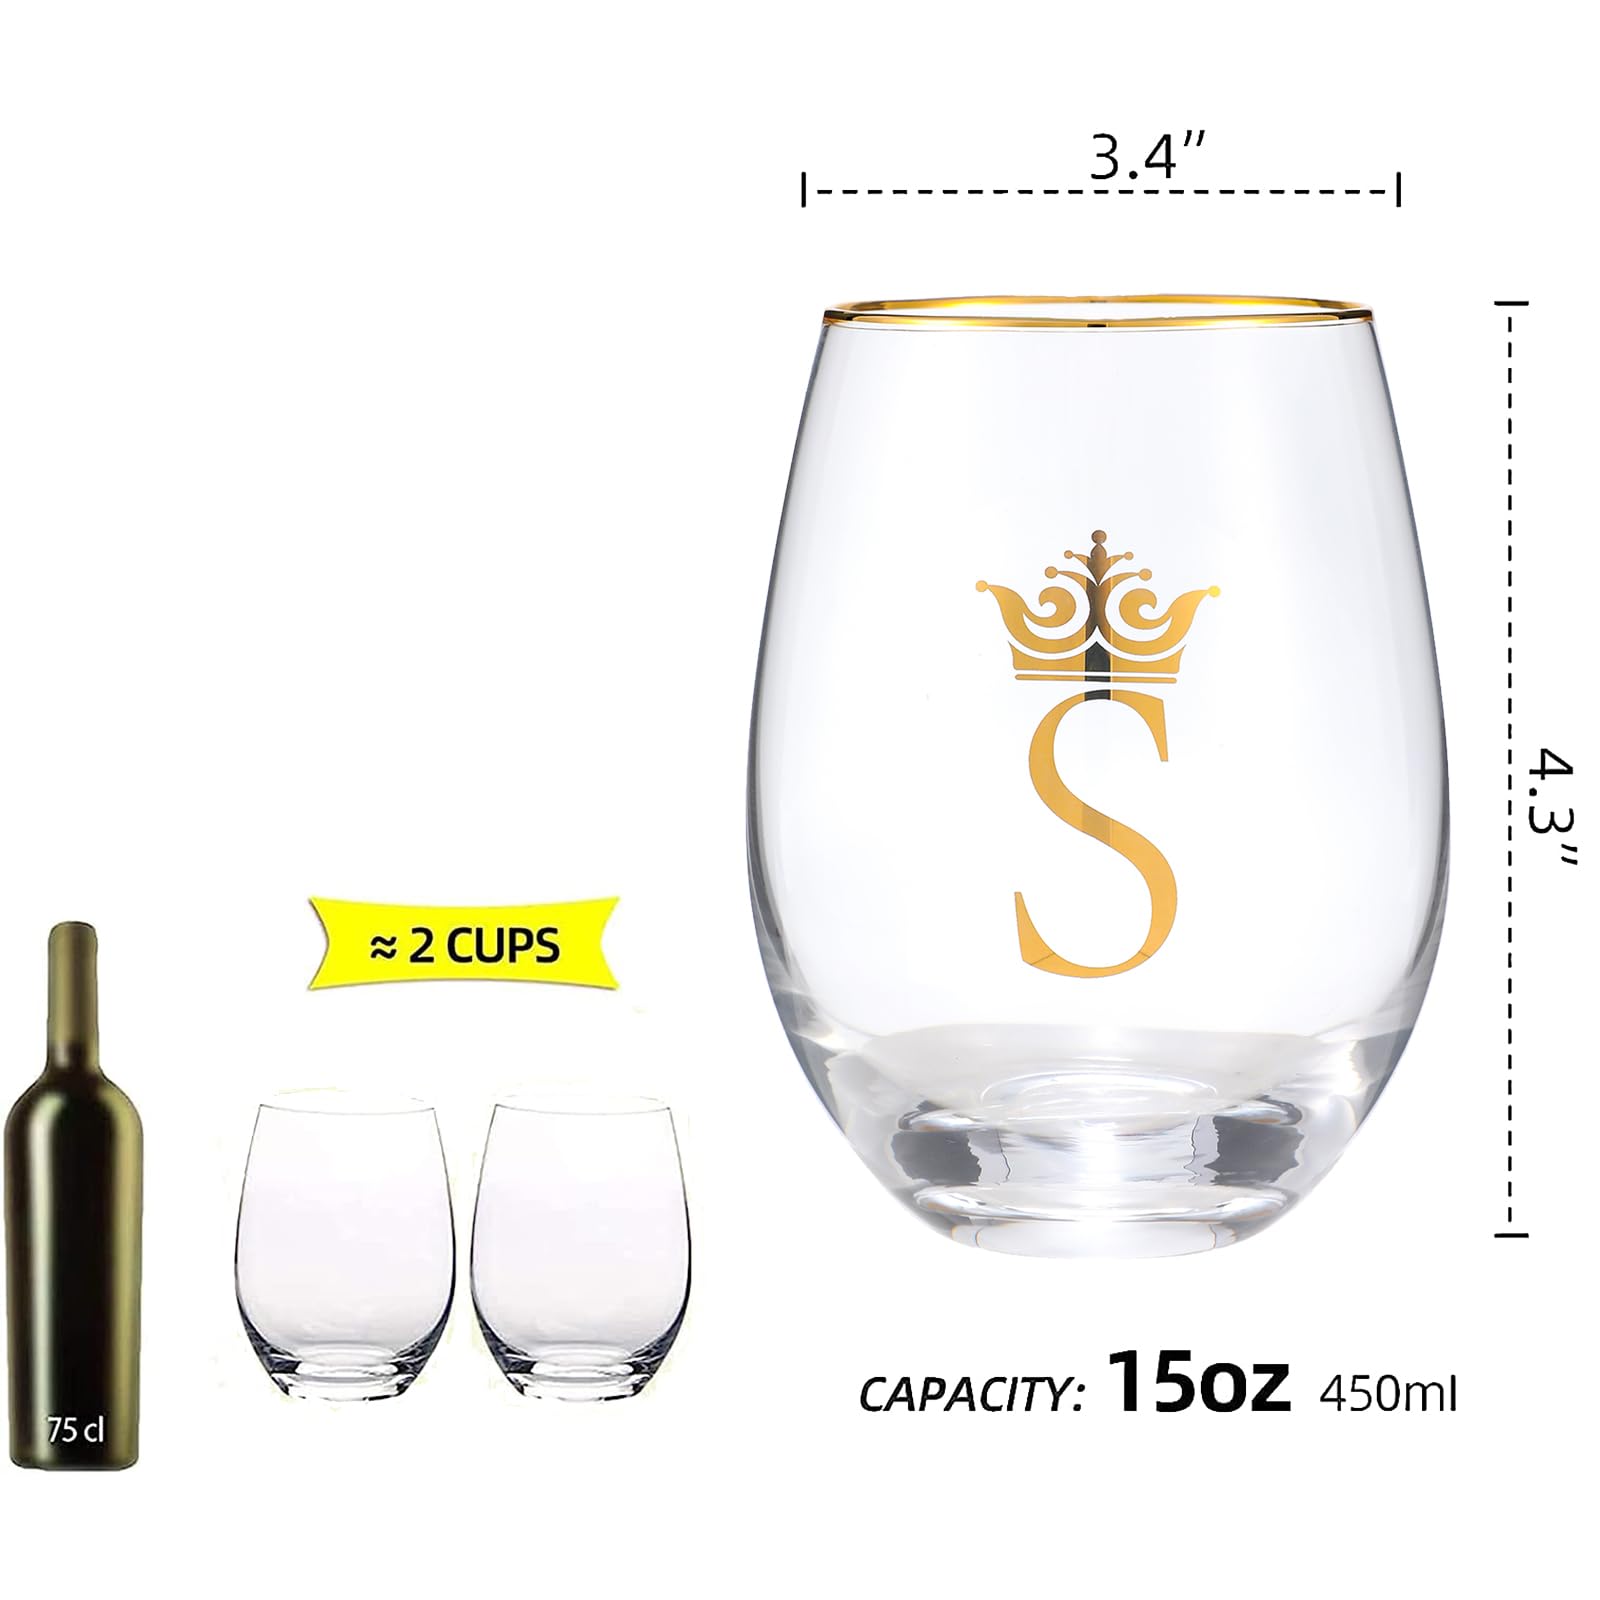 COFOZA Personalized Initial Gifts Letter S 15 Ounce Wine Glass Tumbler Wedding Bridesmaid Birthday Graduation Gift for Men Women Monogrammed Gift Cup (S)